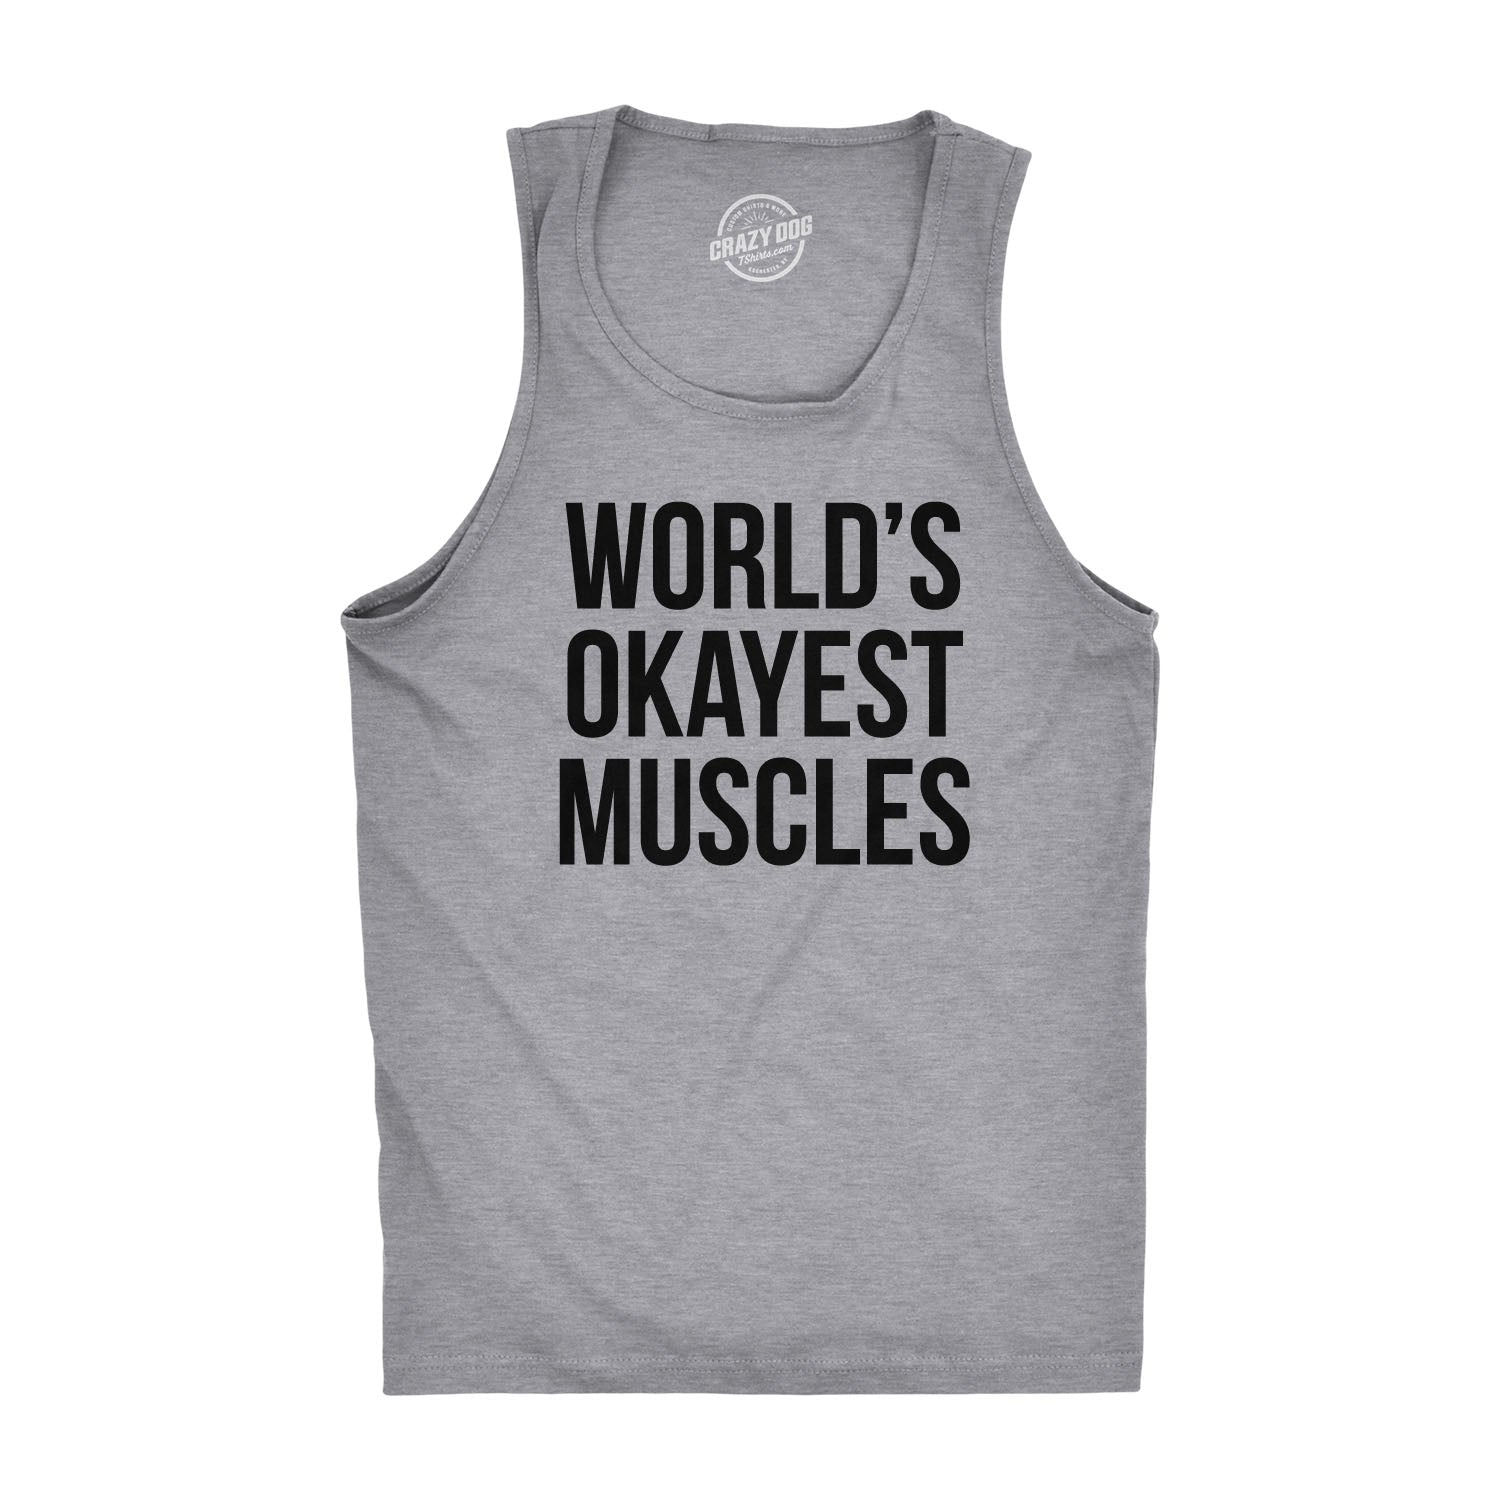 Support Wildlife Raise Boys Funny Athletic Tank Top Gym Top Muscle